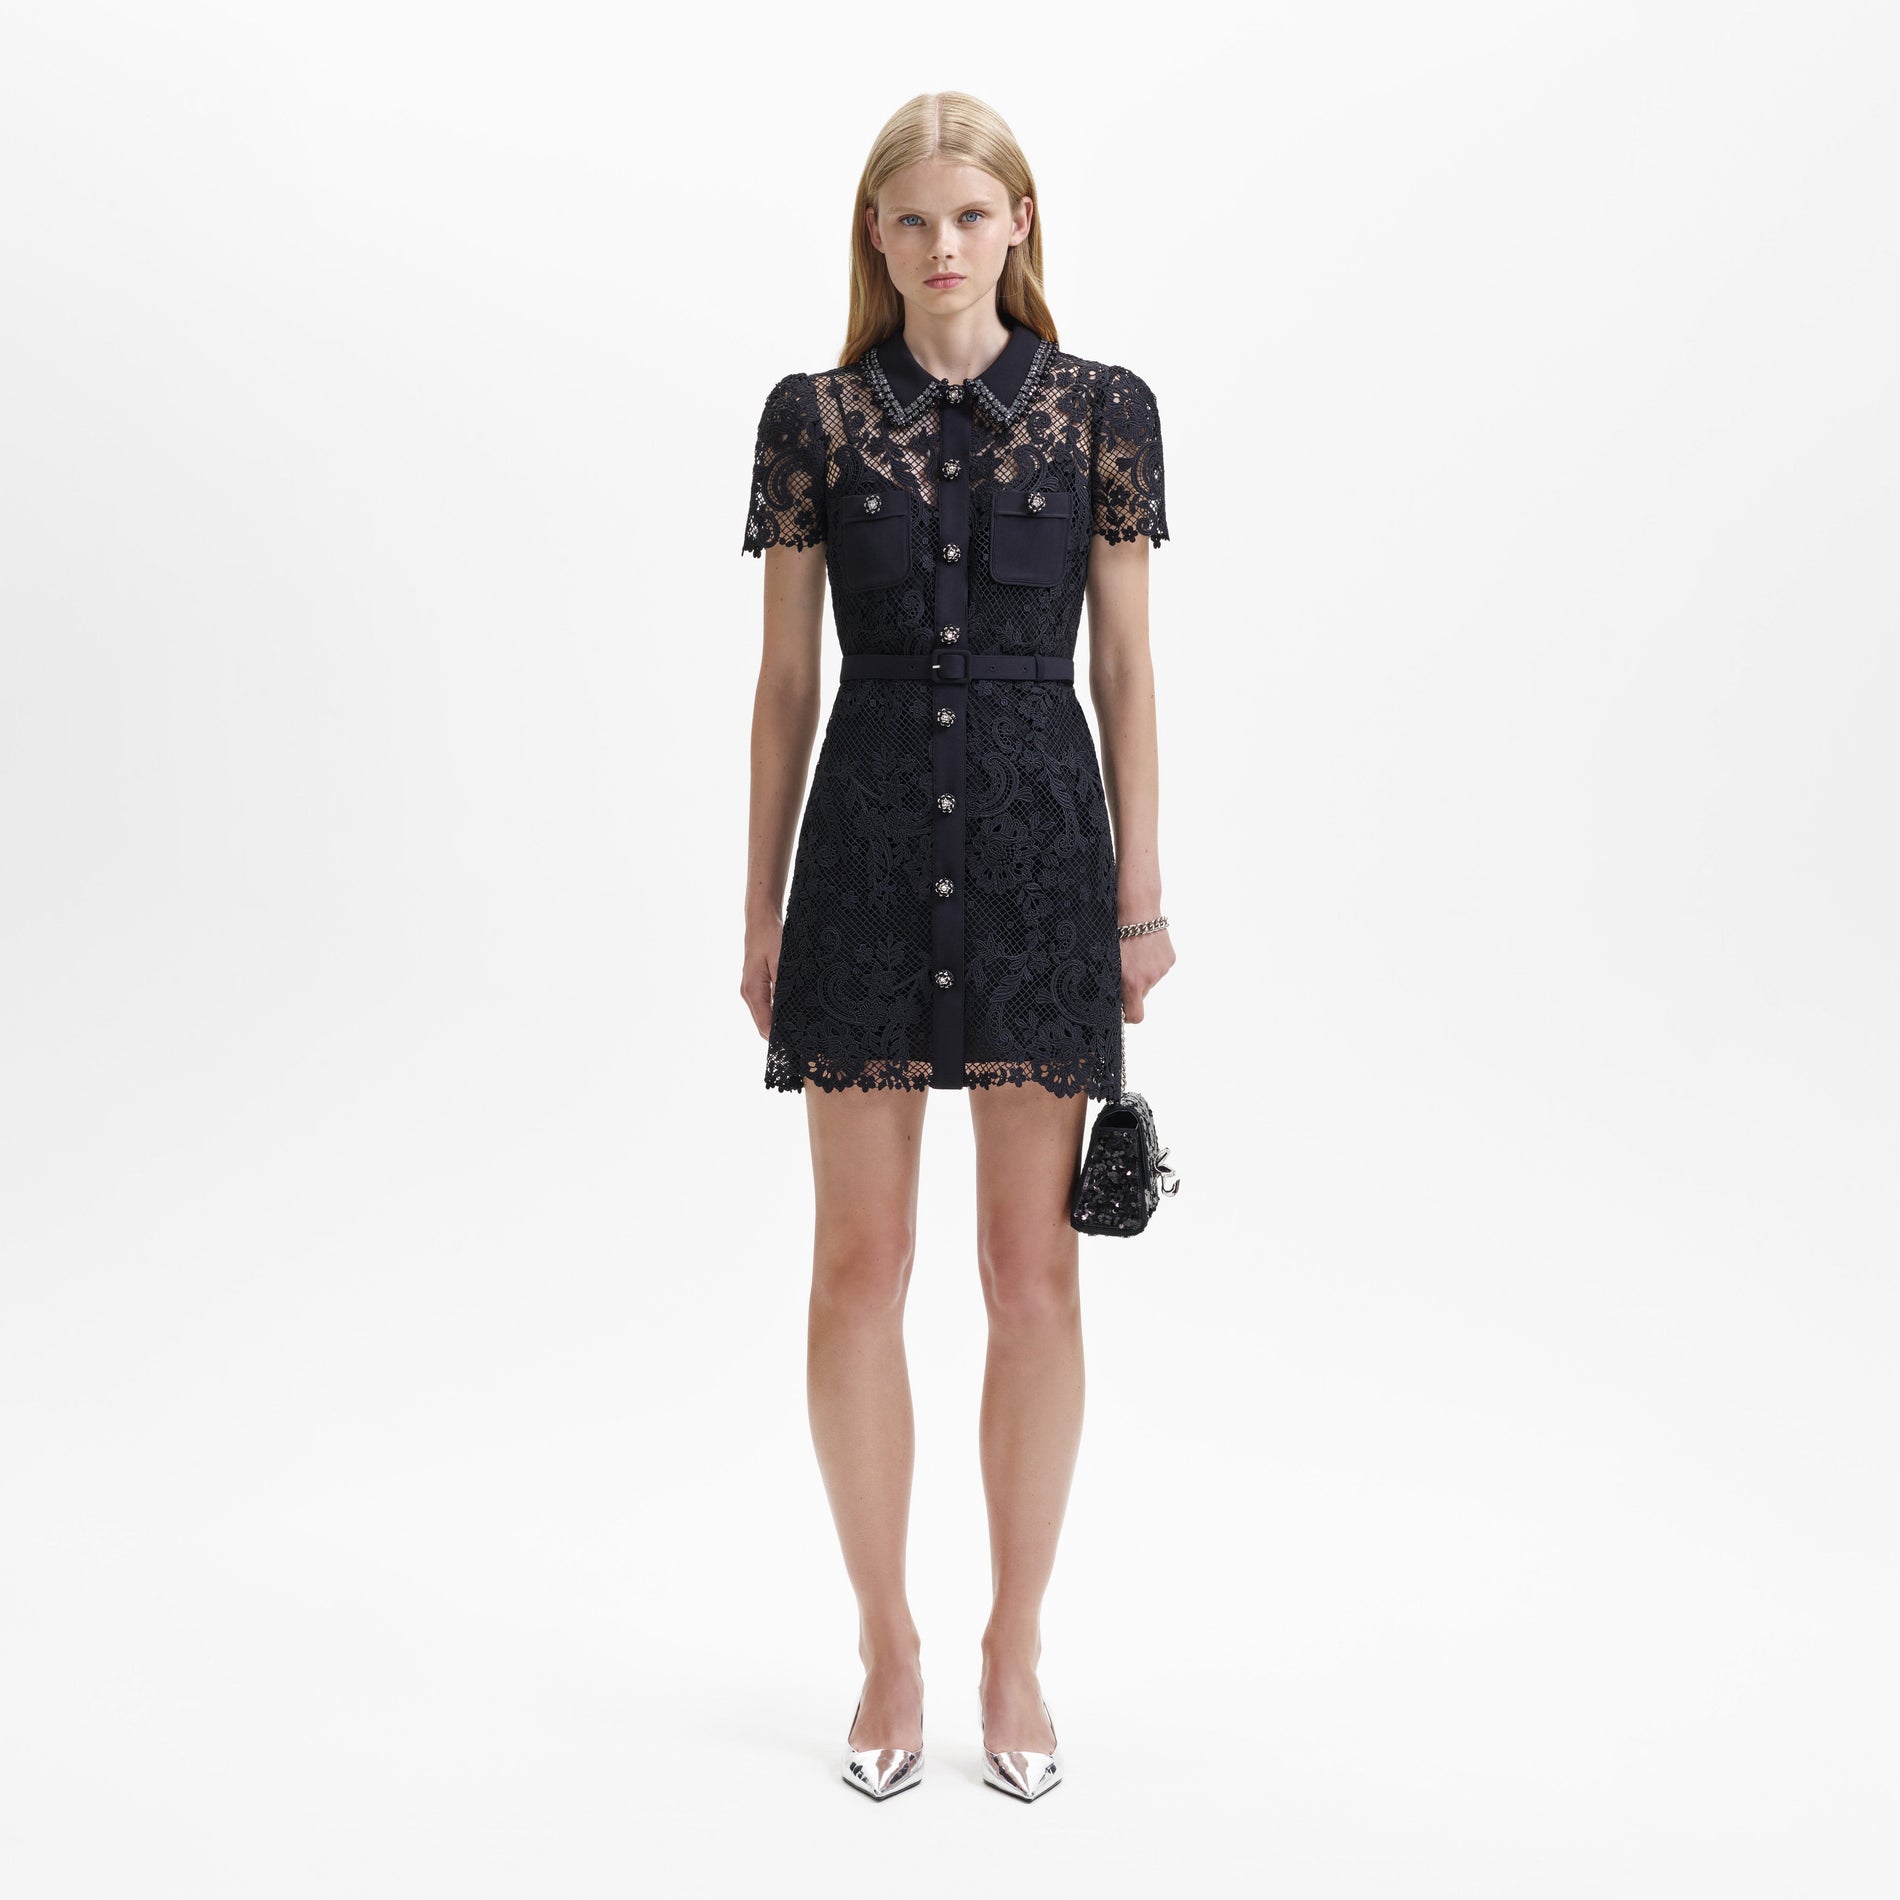 A woman wearing the Black Lace Button Front Mini Dress